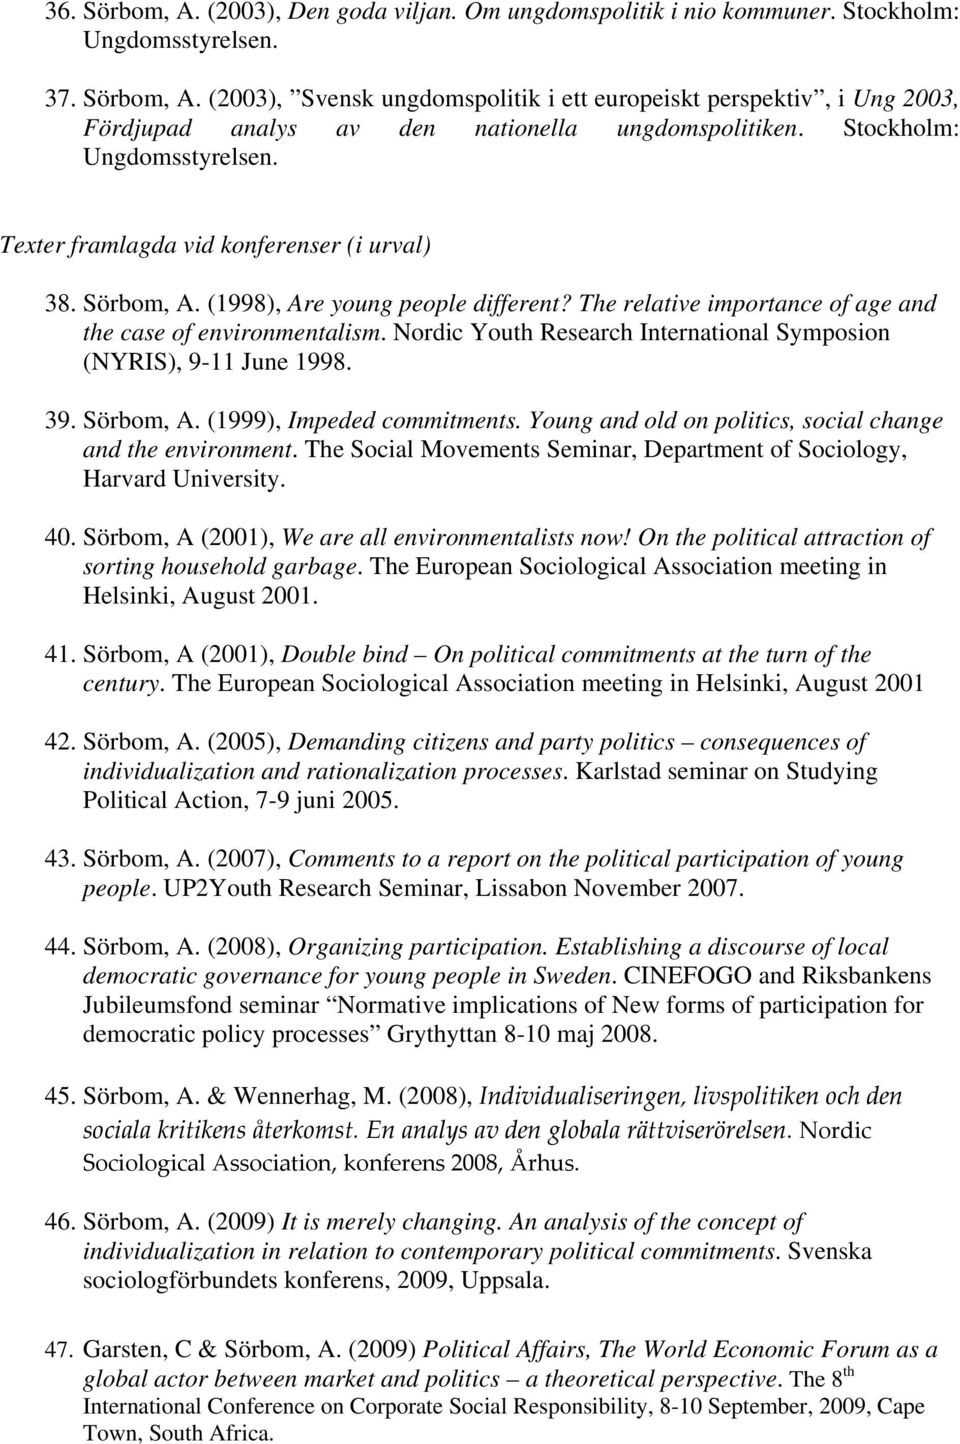 Nordic Youth Research International Symposion (NYRIS), 9-11 June 1998. 39. Sörbom, A. (1999), Impeded commitments. Young and old on politics, social change and the environment.